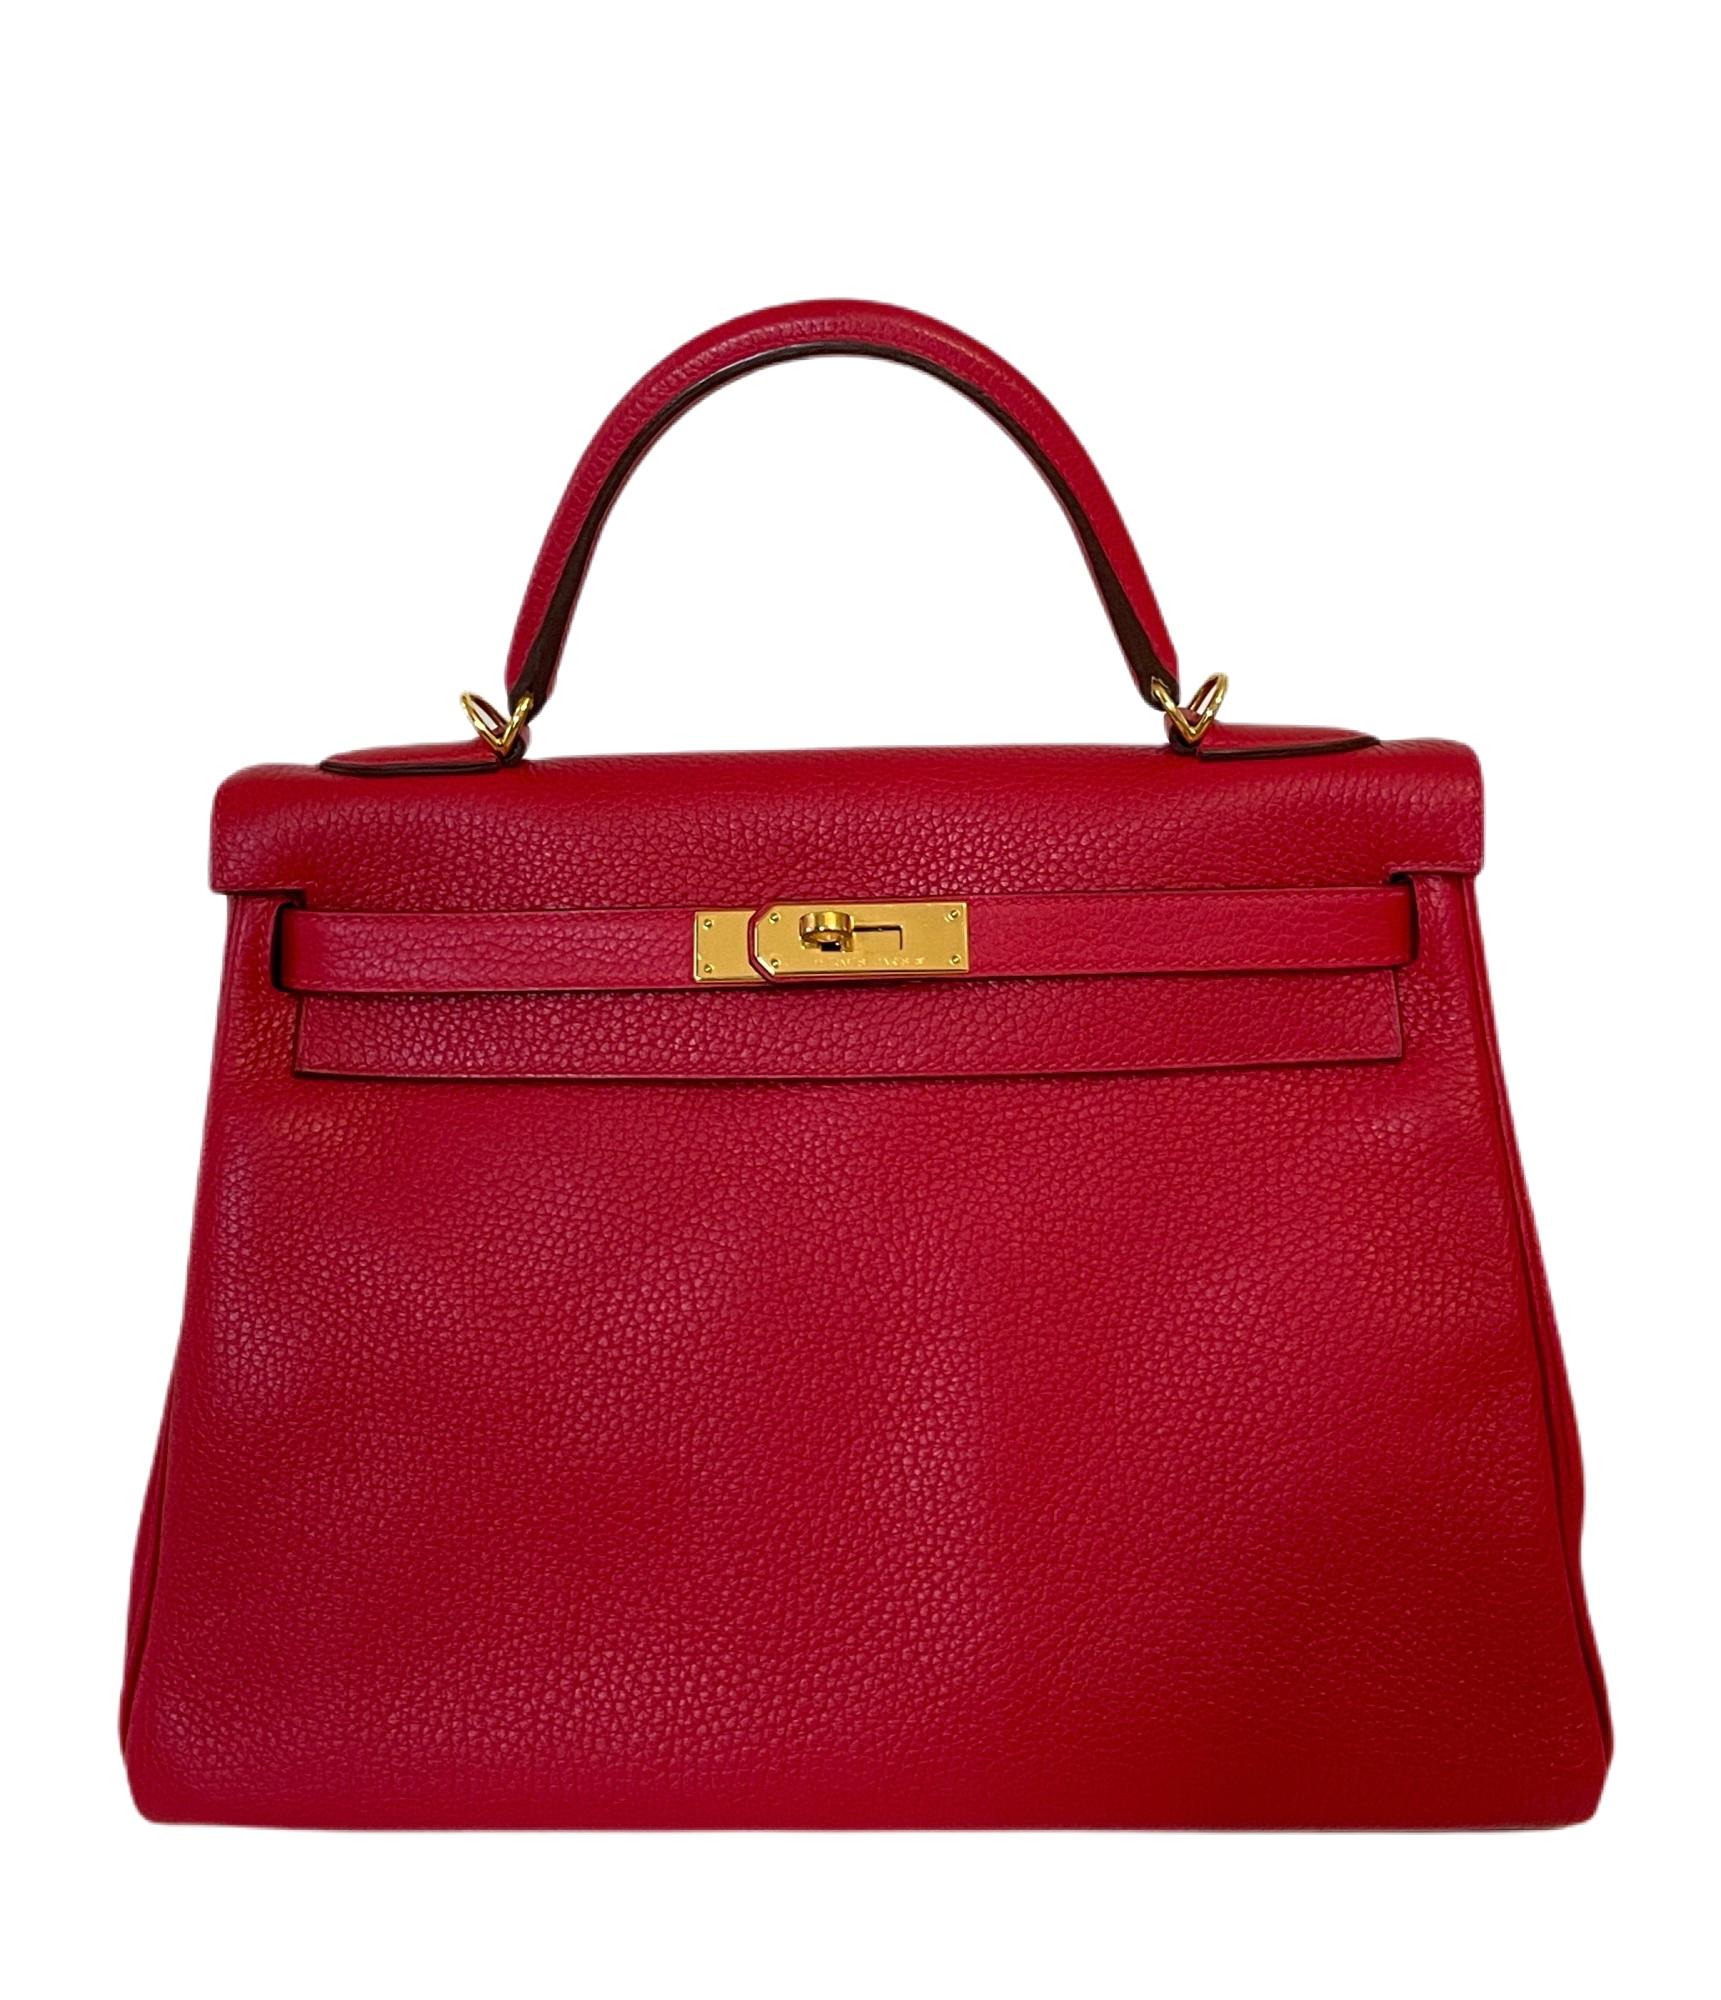 Stunning Pristine Hermes Kelly 32 Rouge Casaque Red Gold Hardware. Pristine Condition with Plastic on Hardware, perfect corners and structure. 2018 C Stamp. 

Shop with Confidence from Lux Addicts. Authenticity Guaranteed!